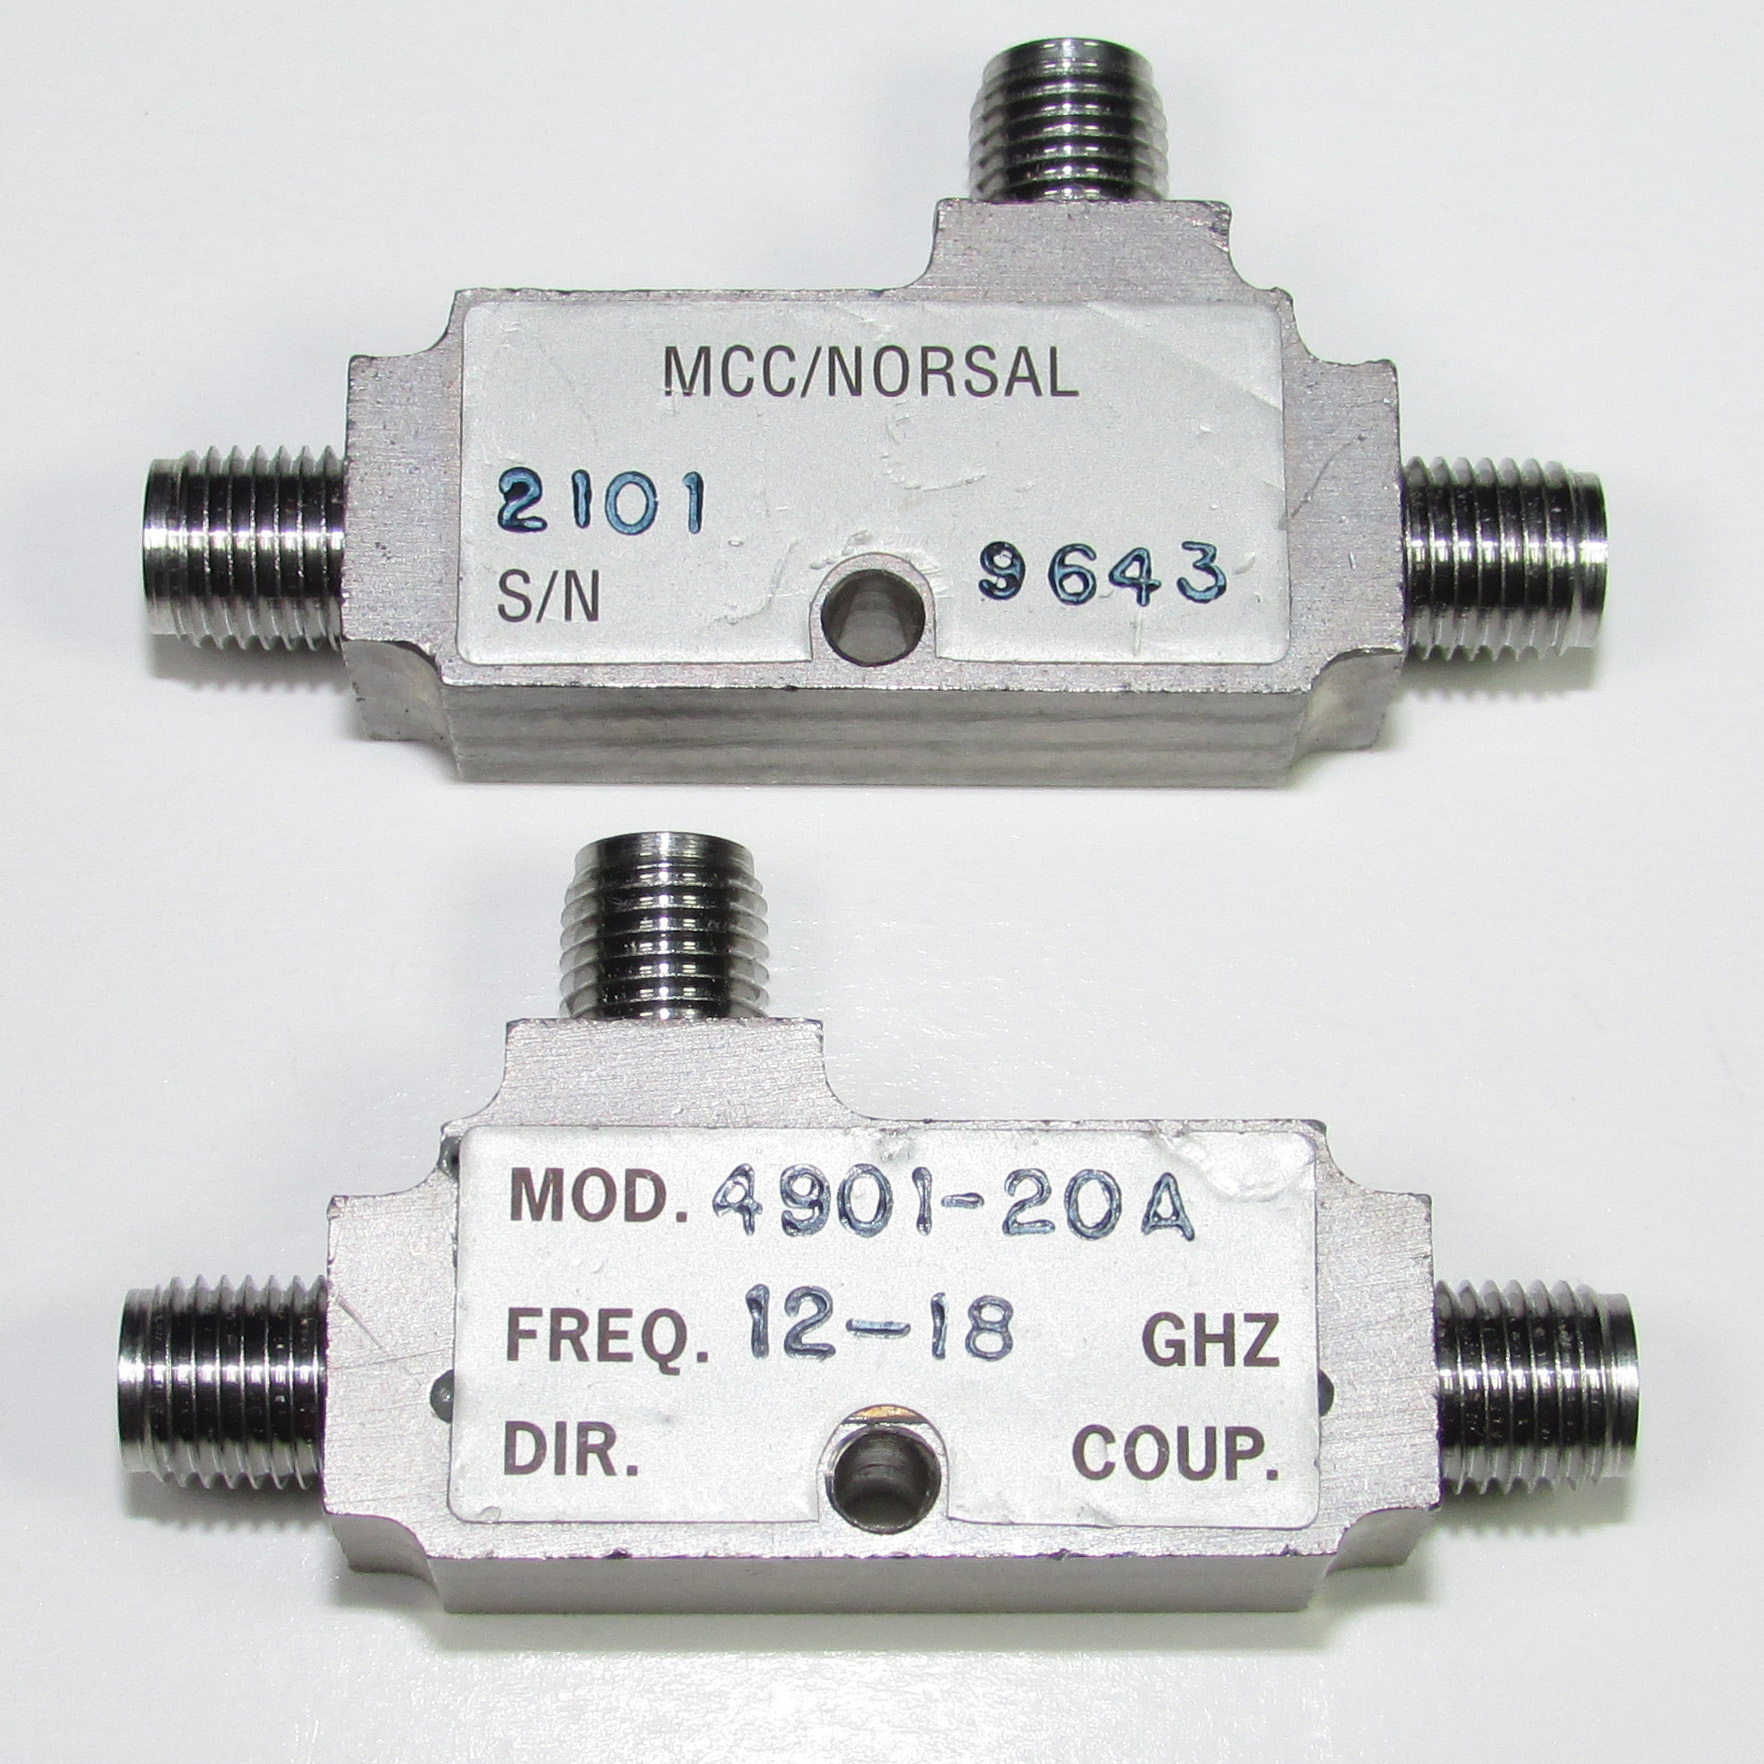 MCC / NORSAL 4901-20A 12-18GHz 20dB SMA microwave directional coupler